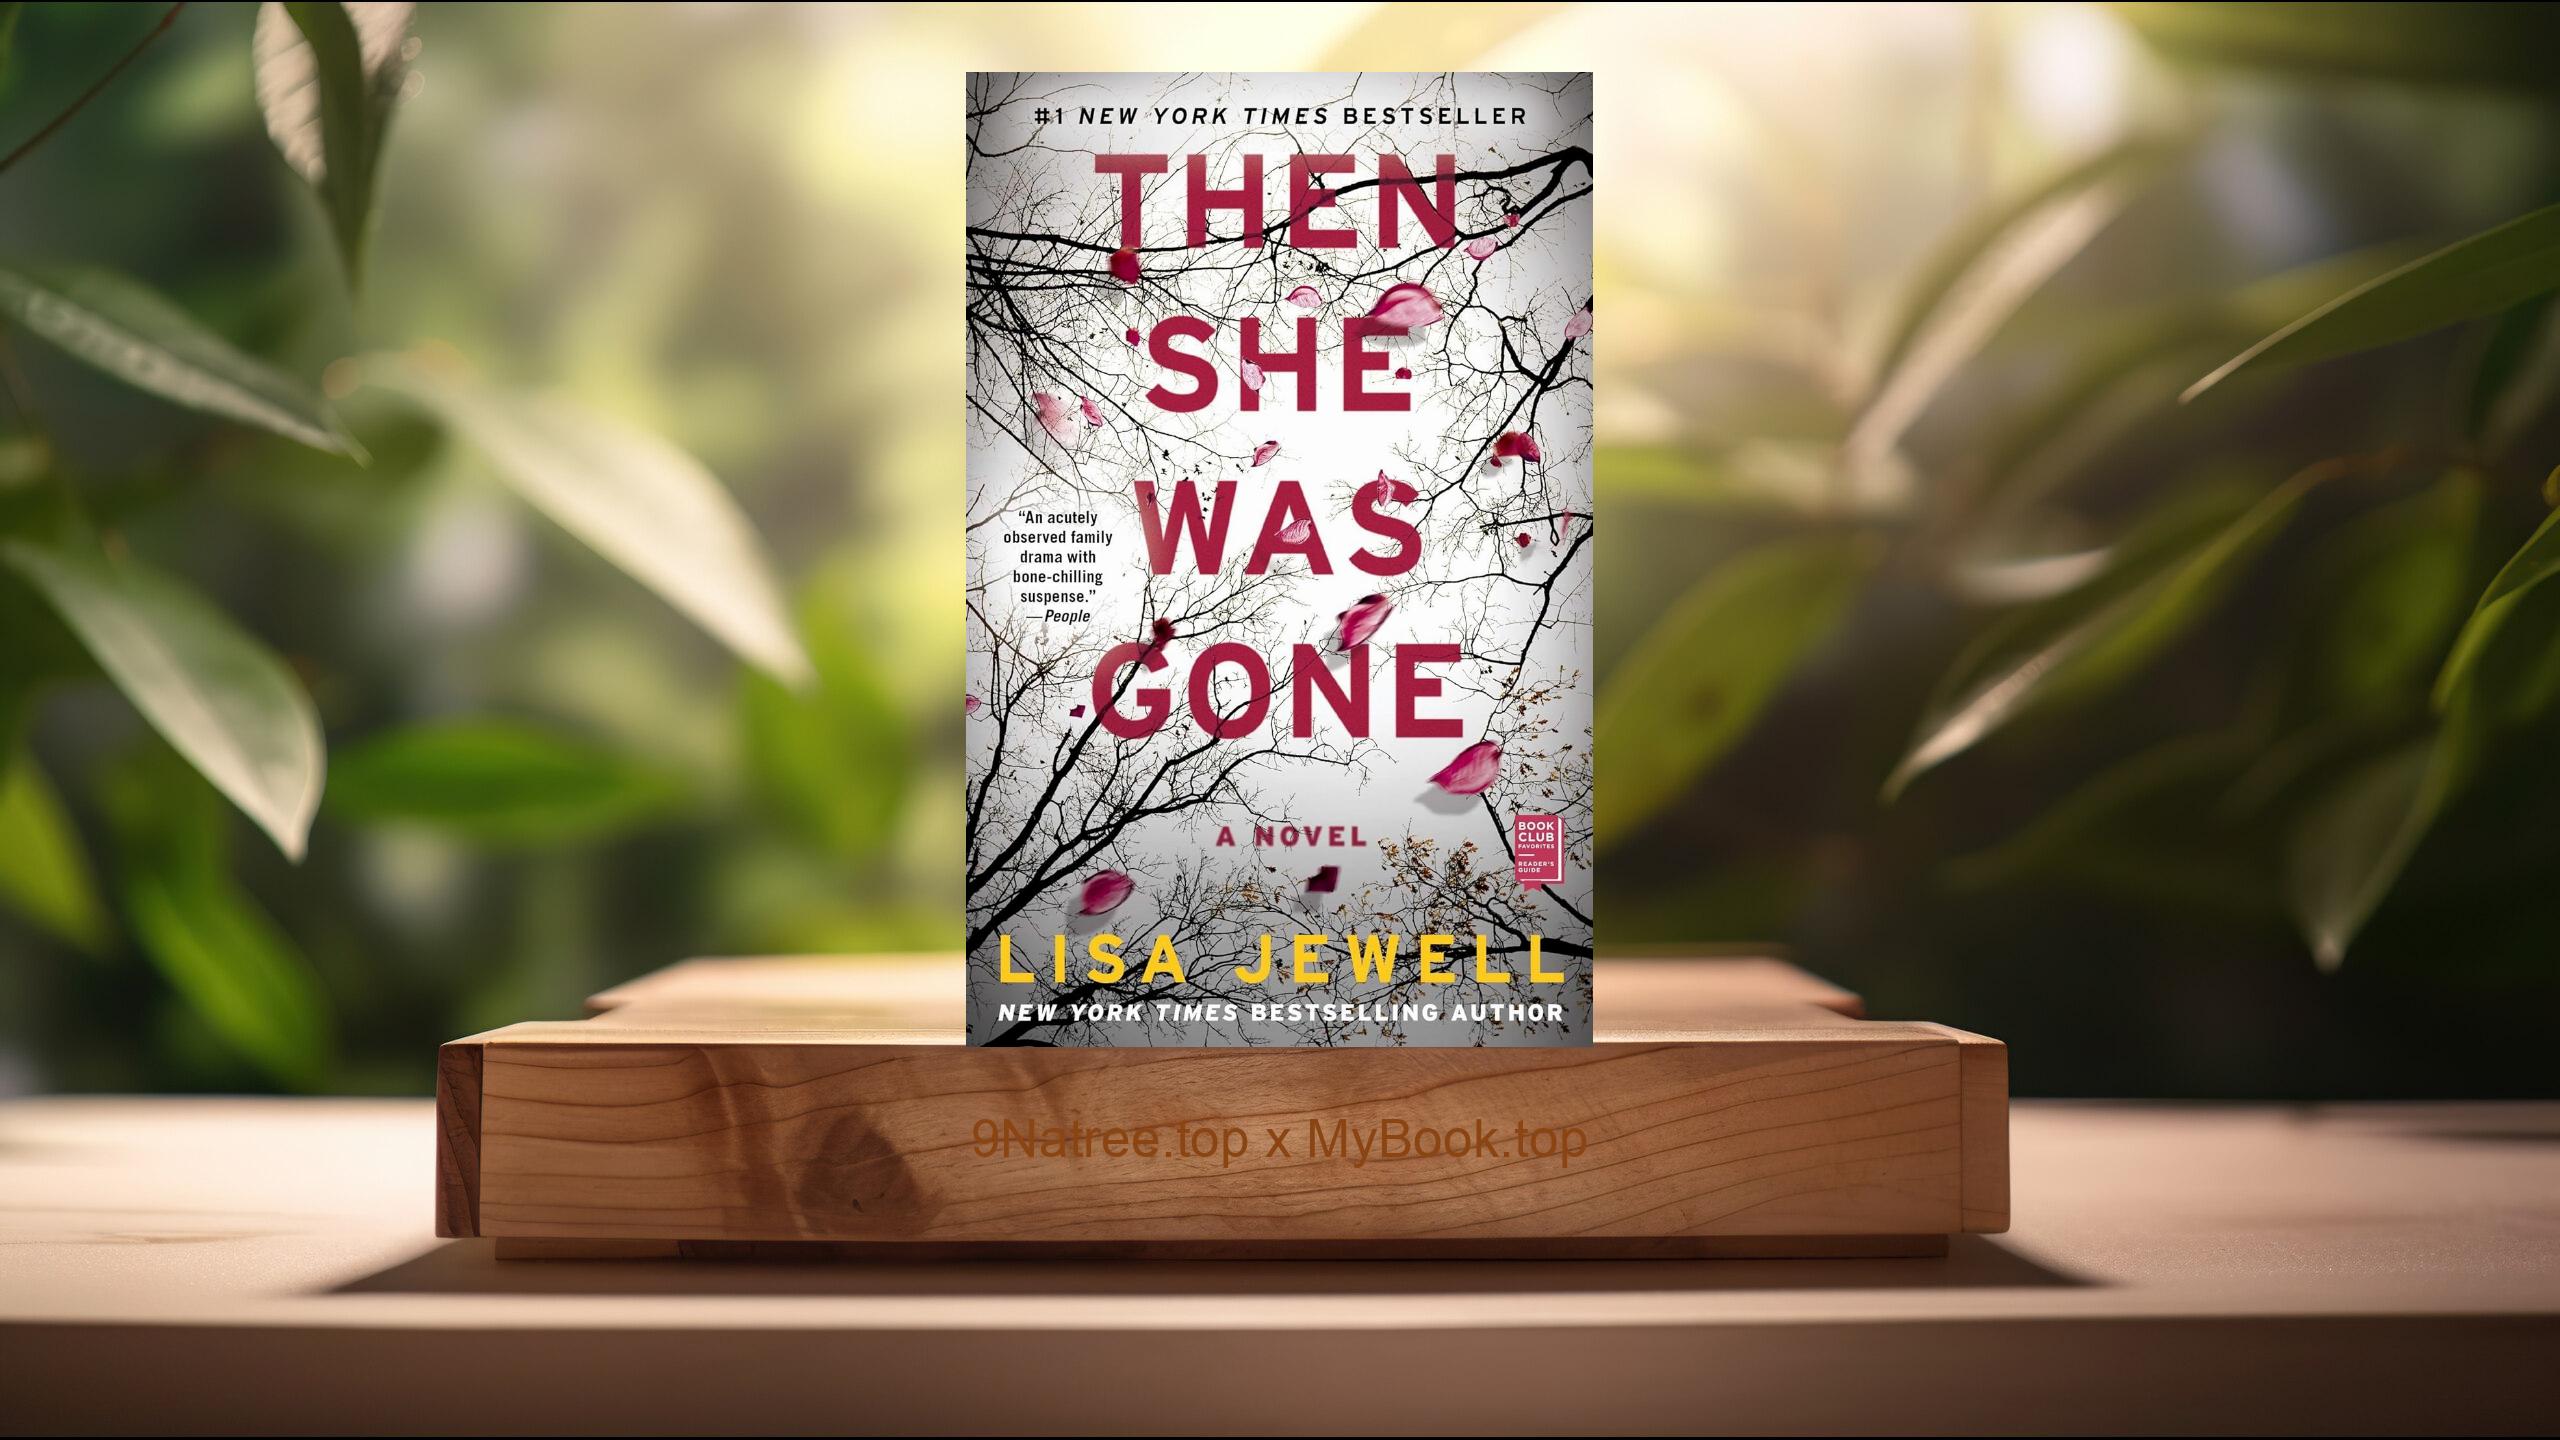 [Review] Then She Was Gone: A Novel (Lisa Jewell) Summarized